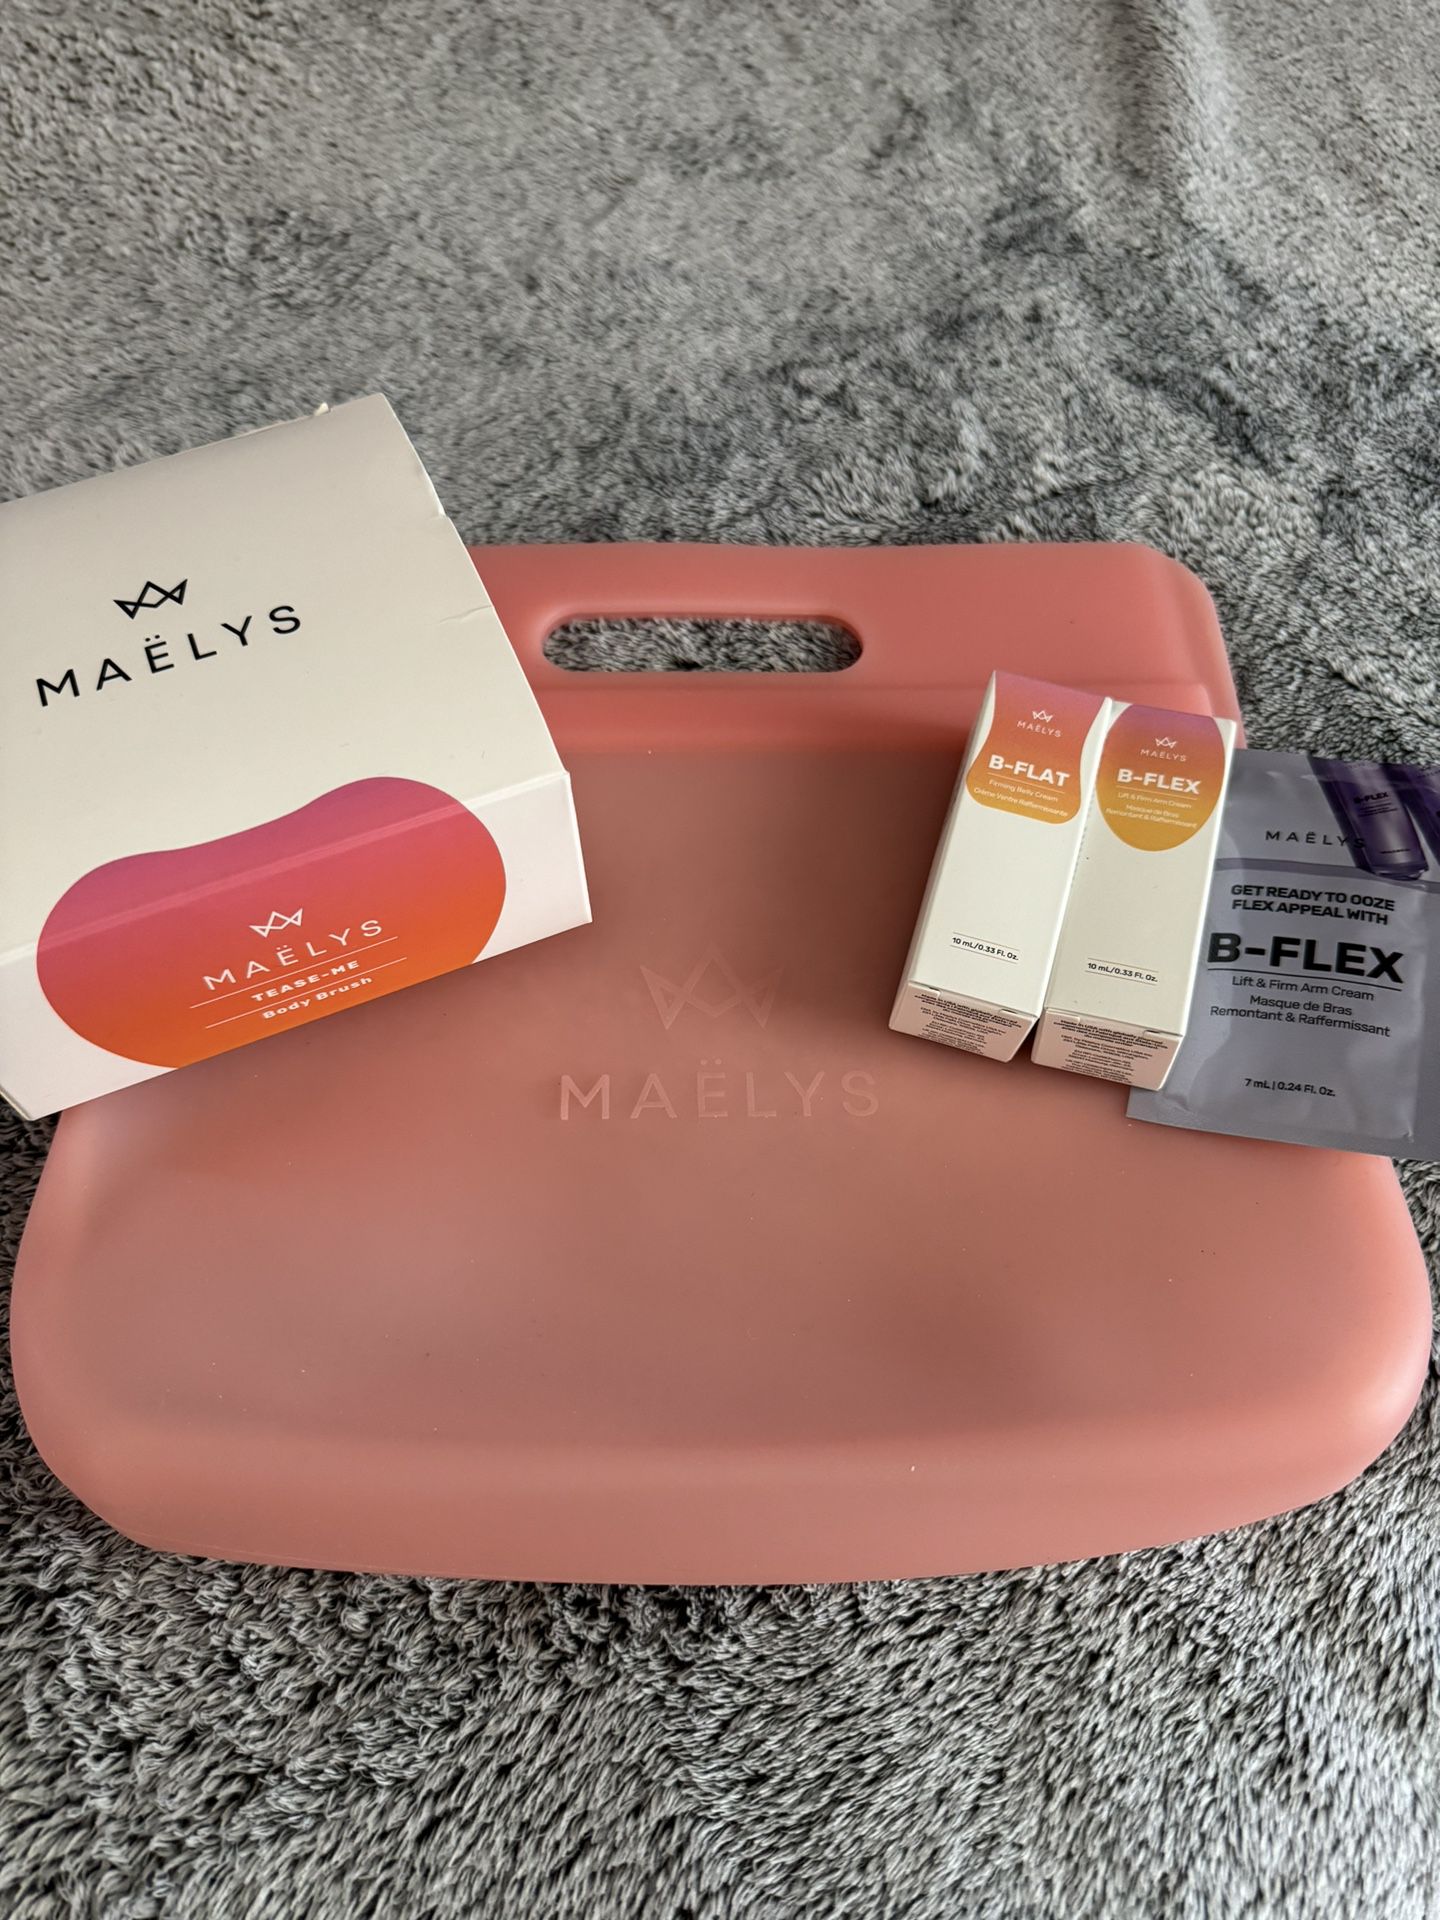 NEW MAELYS 4 PIECE SET BODY BRUSH, B-FLAT B-FLEX IN REUSABLE WATER RESISTANT CASE $20 For All! 